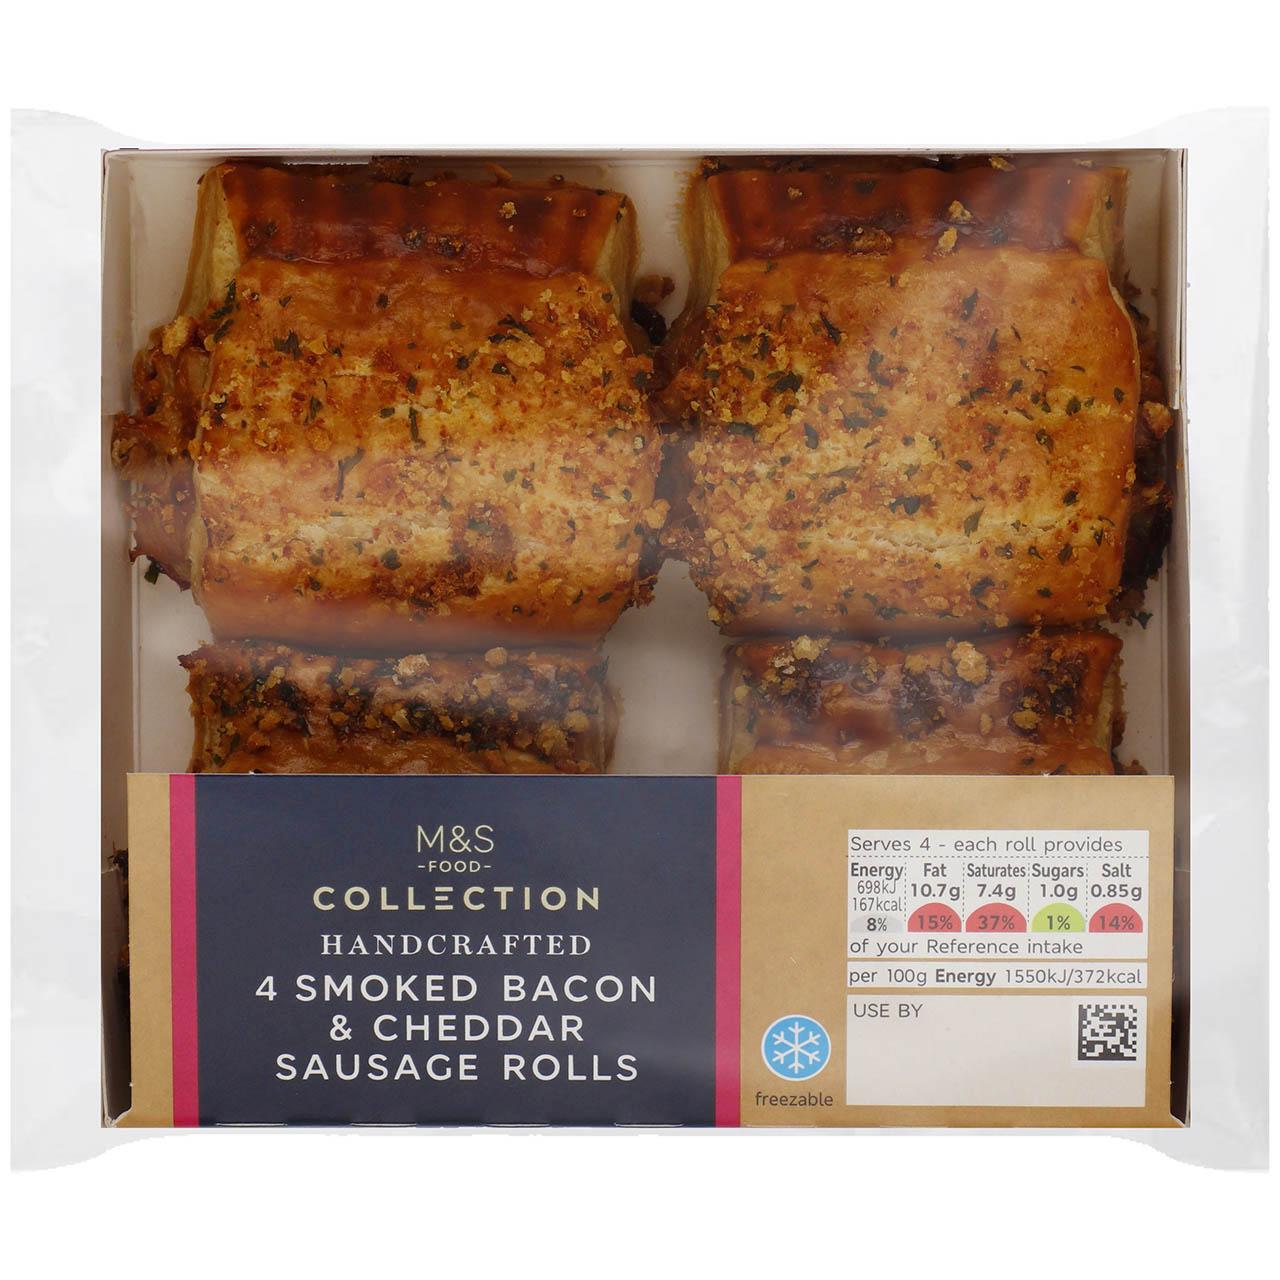 M&S Collection 4 Smoked Bacon & Cheddar Sausage Rolls 4 per pack